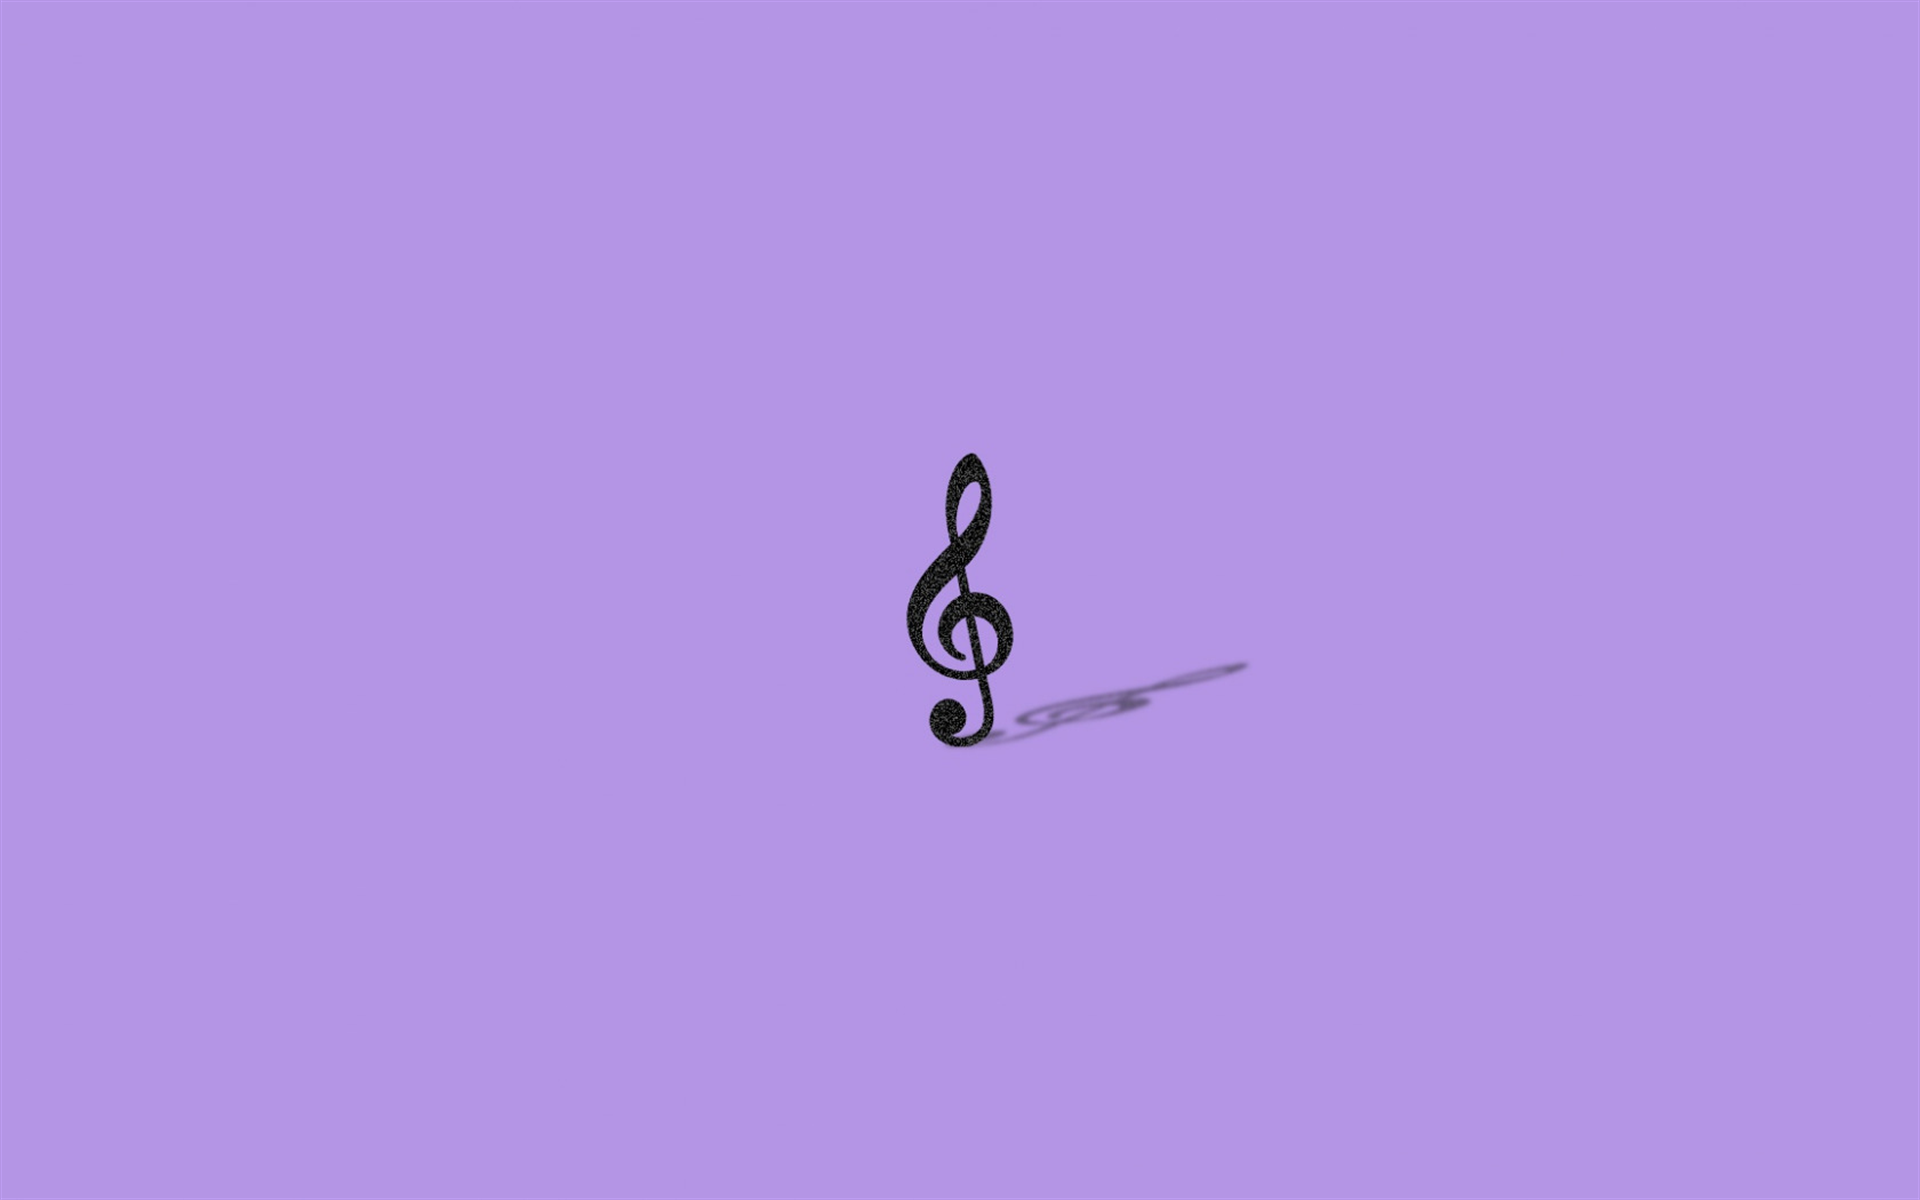 Download wallpaper Clef, musical symbol, purple background, music background, music concepts for desktop with resolution 1920x1200. High Quality HD picture wallpaper